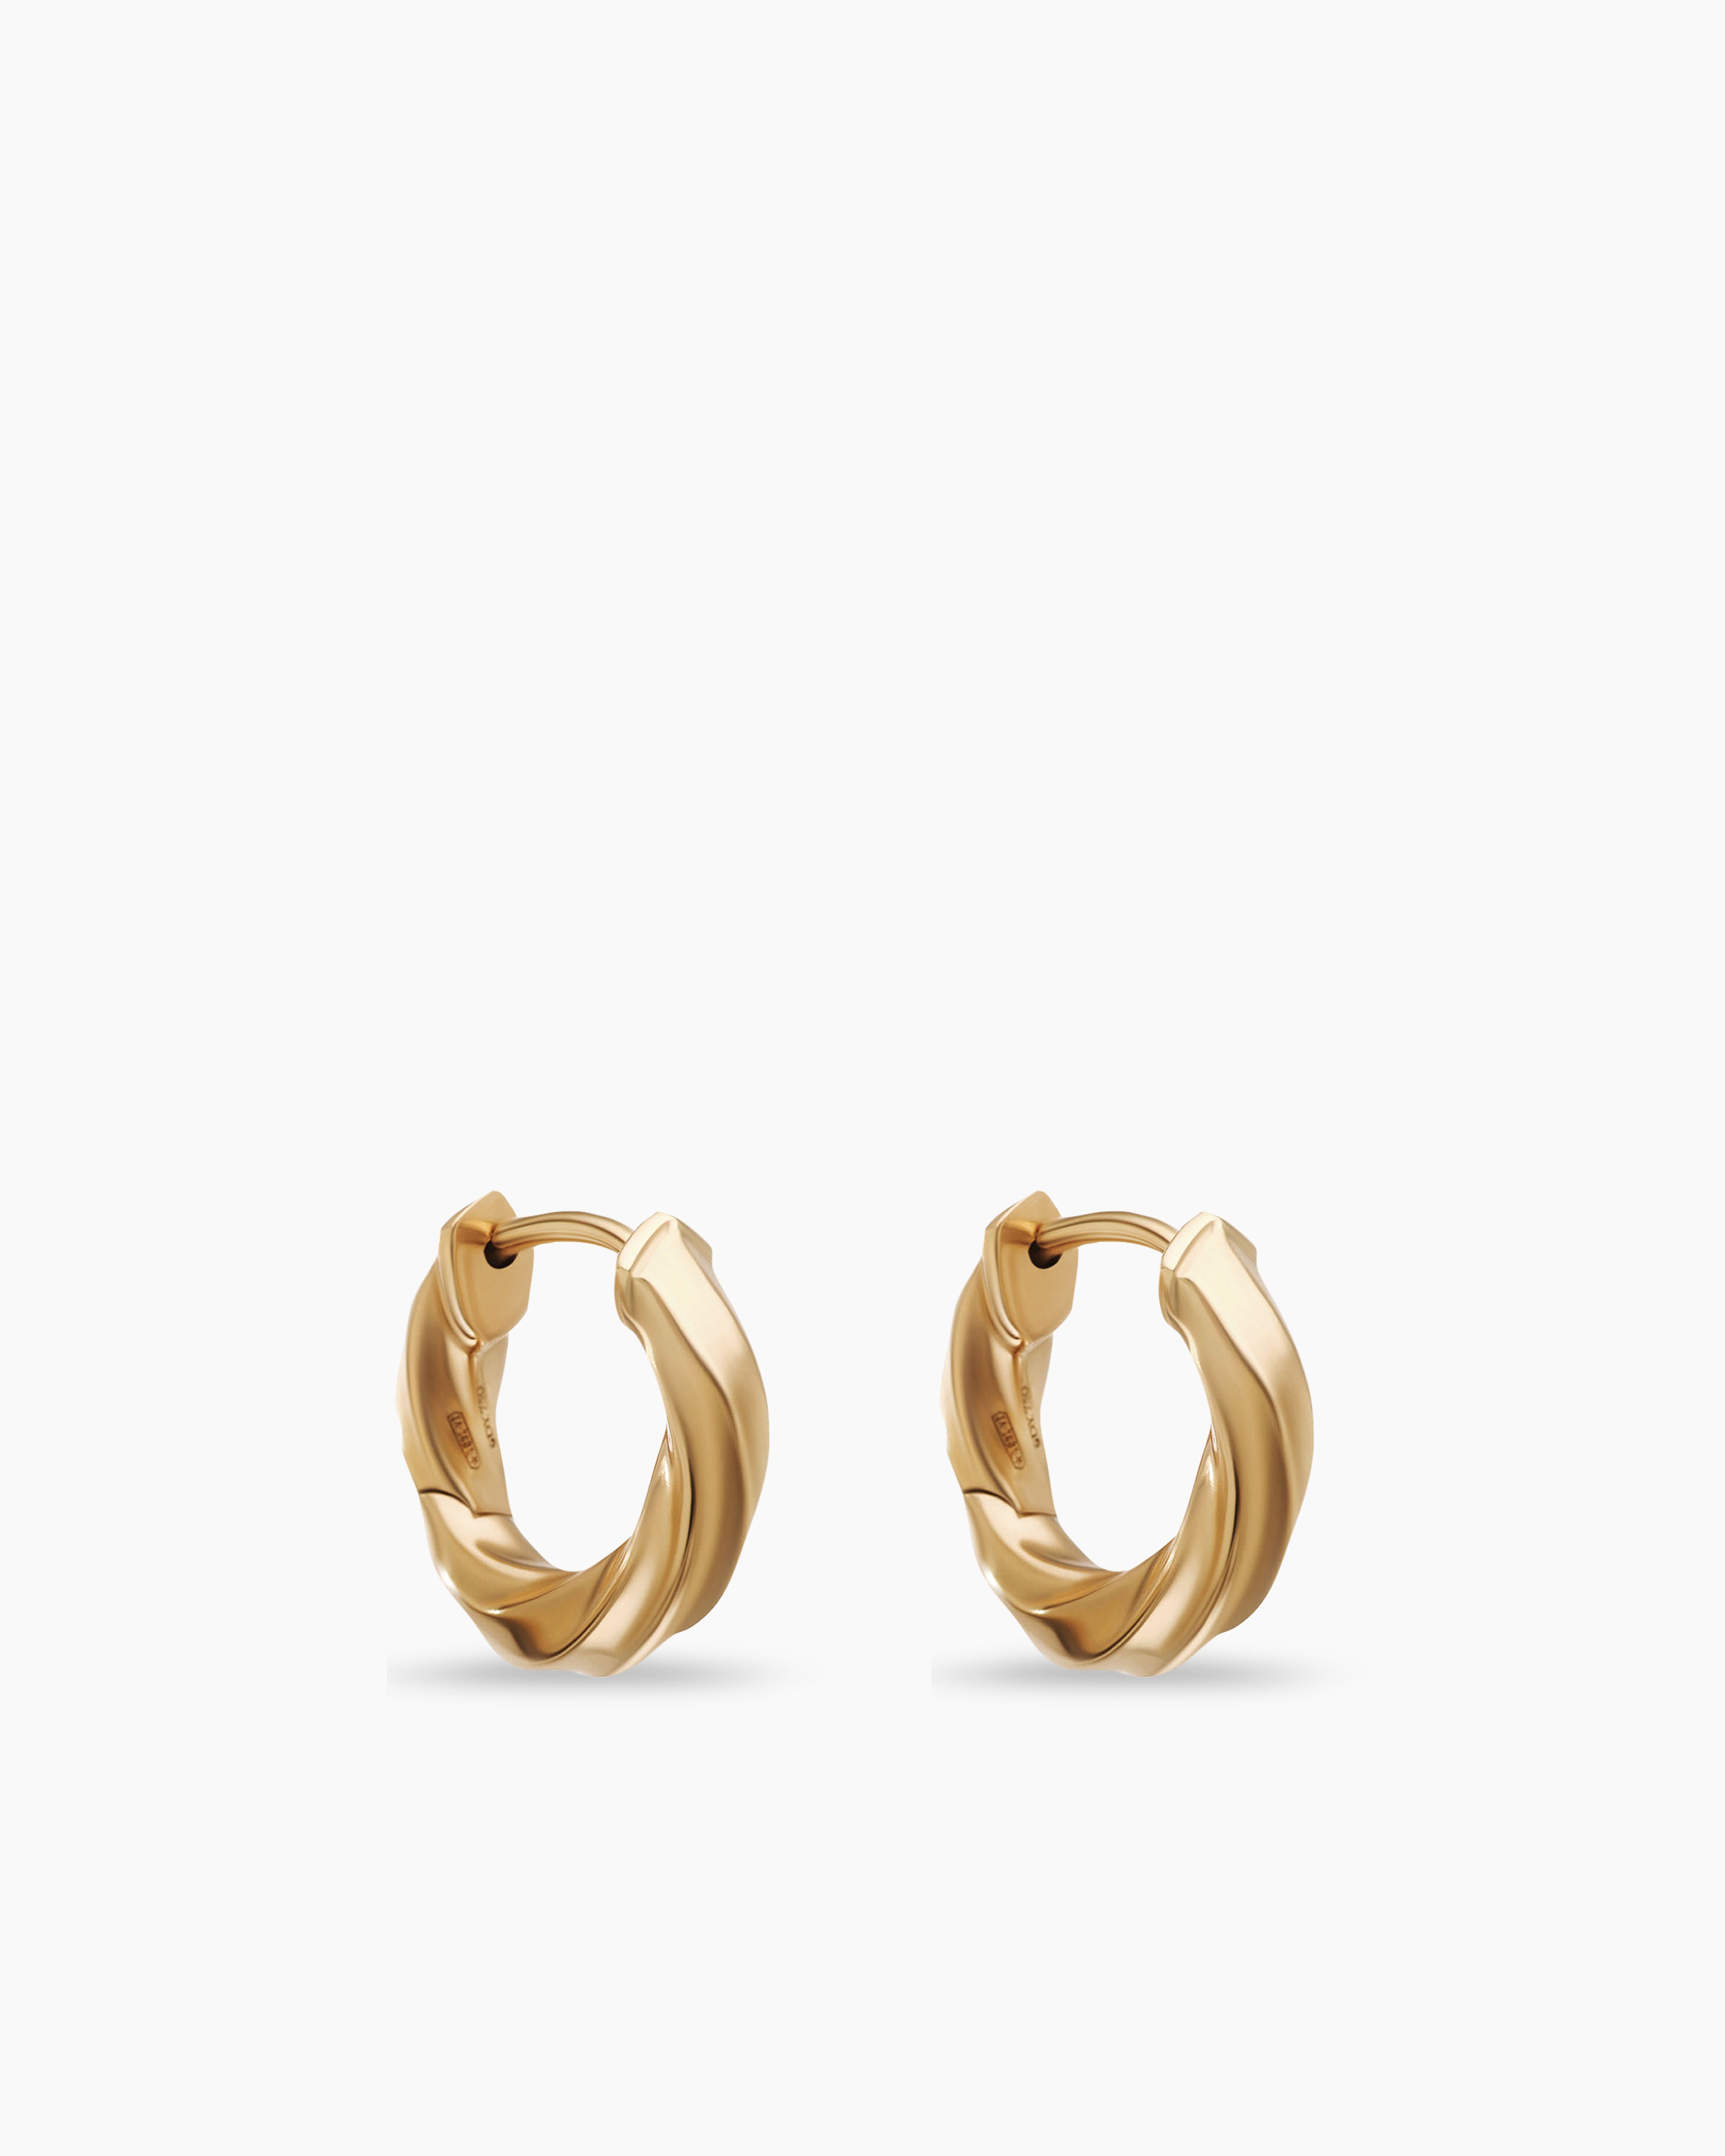 Thick Chunky Hoops, Small Bold Hoop Earrings, Statement Gold Hoops – AMYO  Jewelry